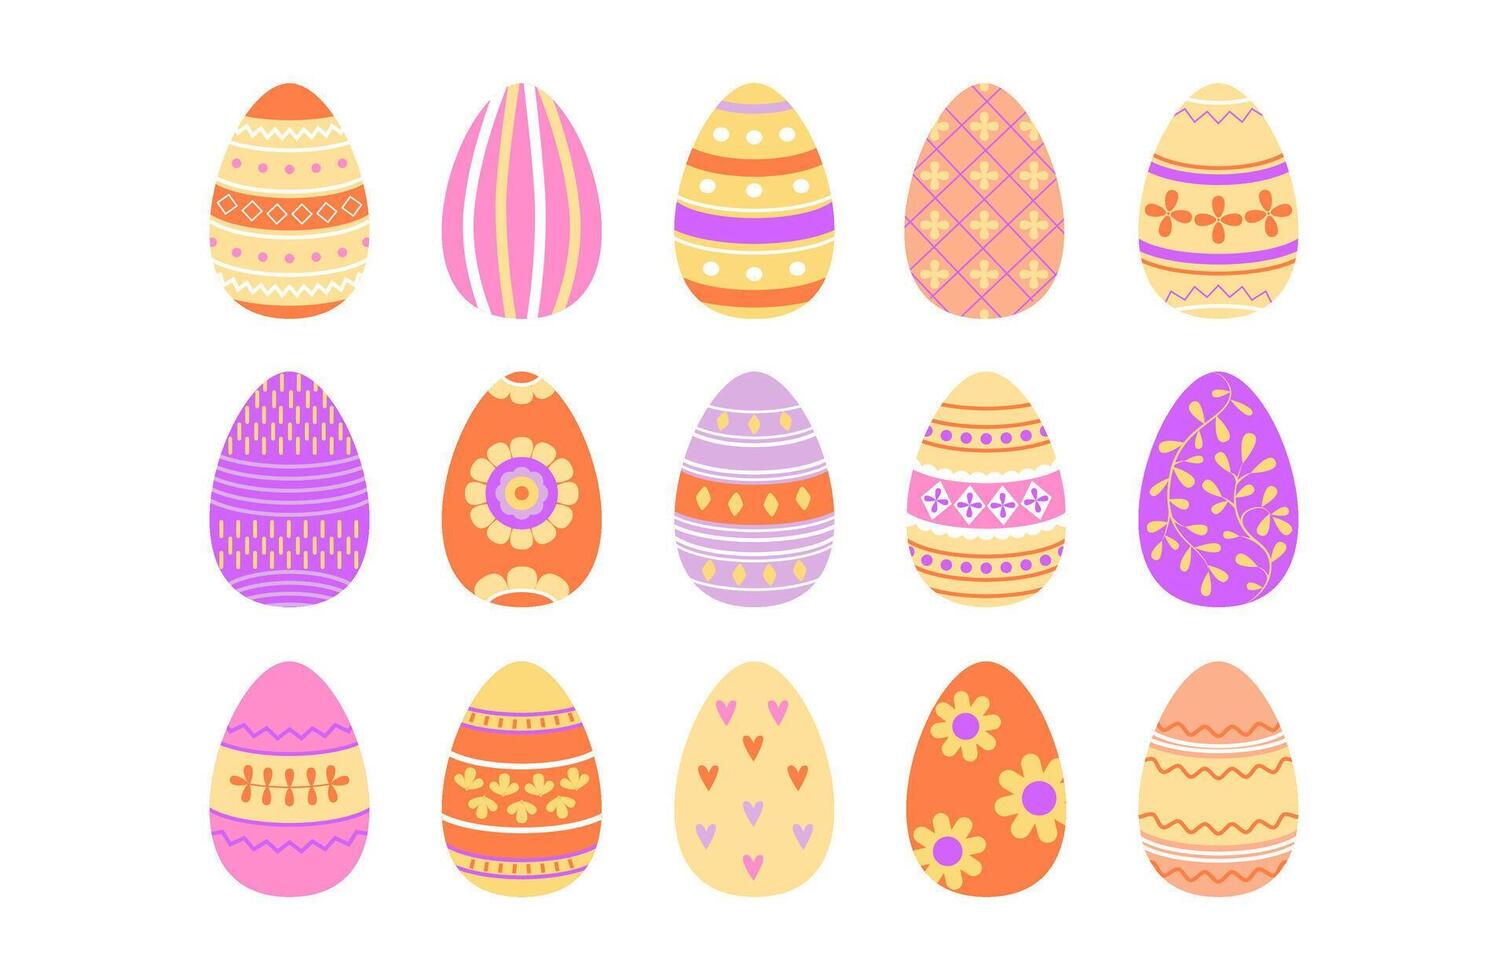 Colorful festive Easter eggs. Holiday decorative eggs. Doodles and icons. Festive egg's ornament. Spring holidays. Modern bold vibrant colors. vector